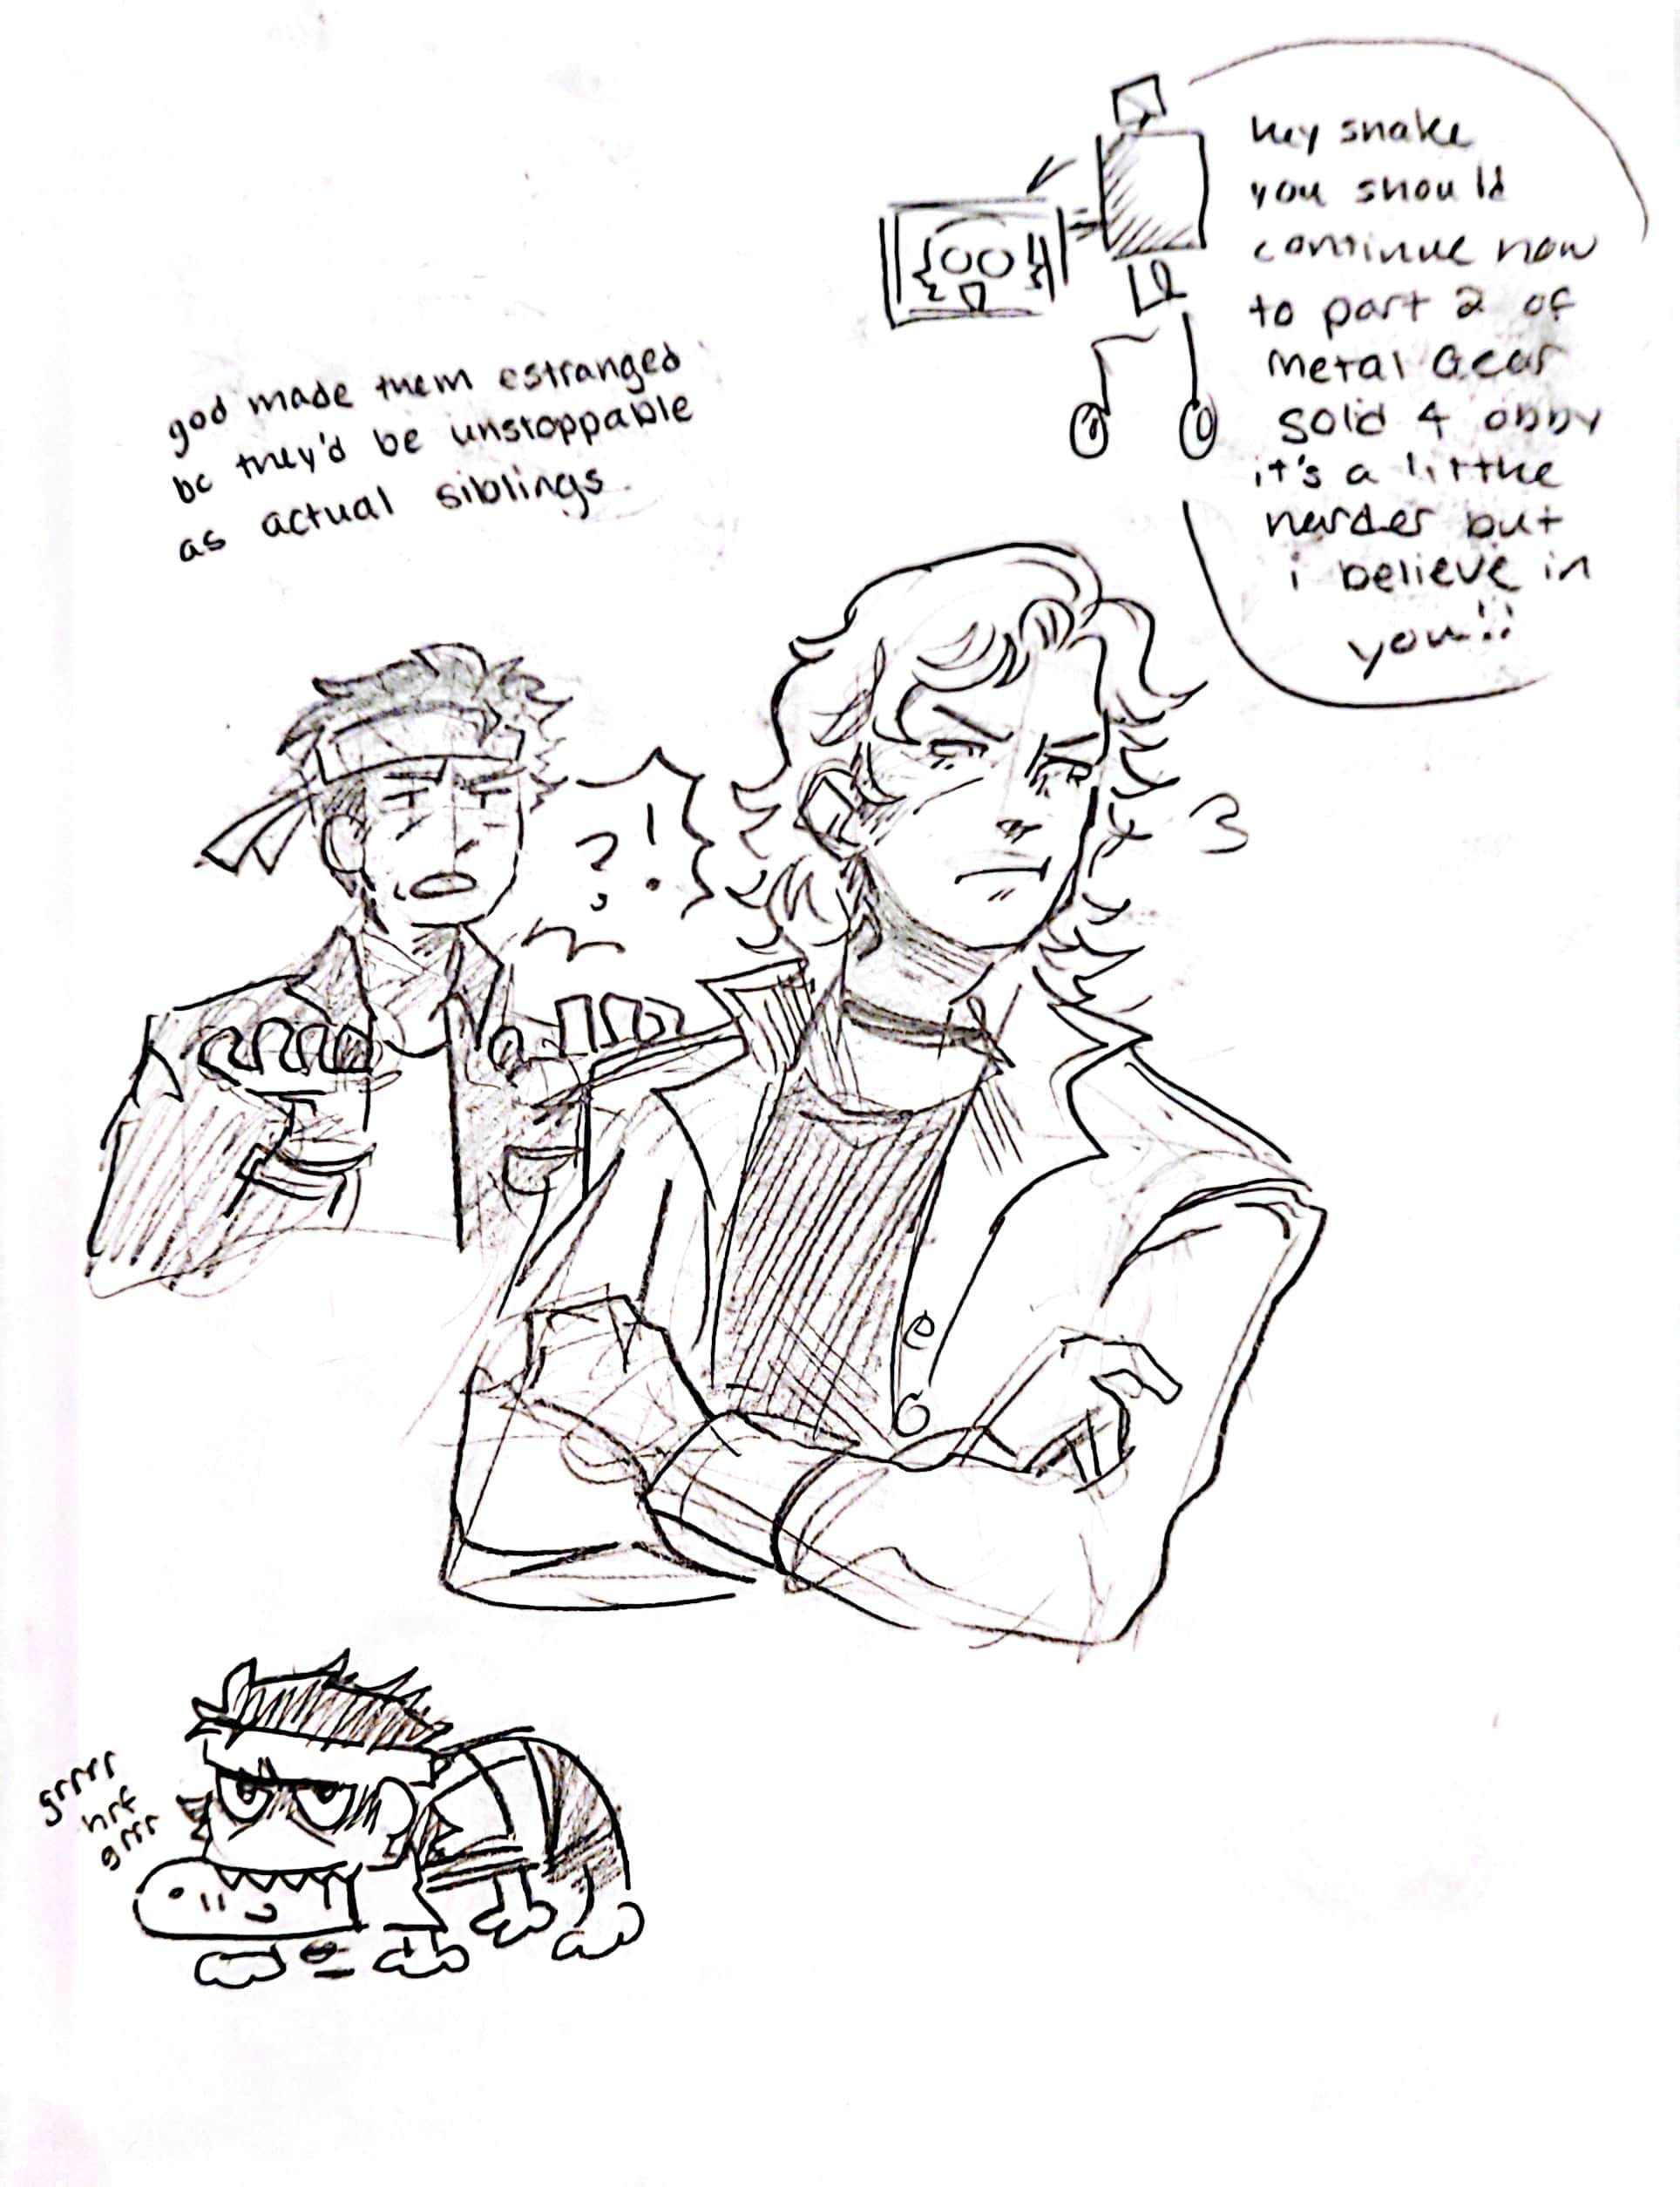 Three doodles, the first is a tiny MK. II with Otacon on the screen saying 'hey snake you should continue now to part 2 of Metal Gear Solid 4 obby it's a little harder but i believe in you!!; A doodle of a younger Solid & Liquid captioned 'god made them estranged bc they'd be unstoppable as actual siblings; A messy chibi doodle of Naked Snake on all fours biting into a fish captioned 'grrrrr hrf grrrr'